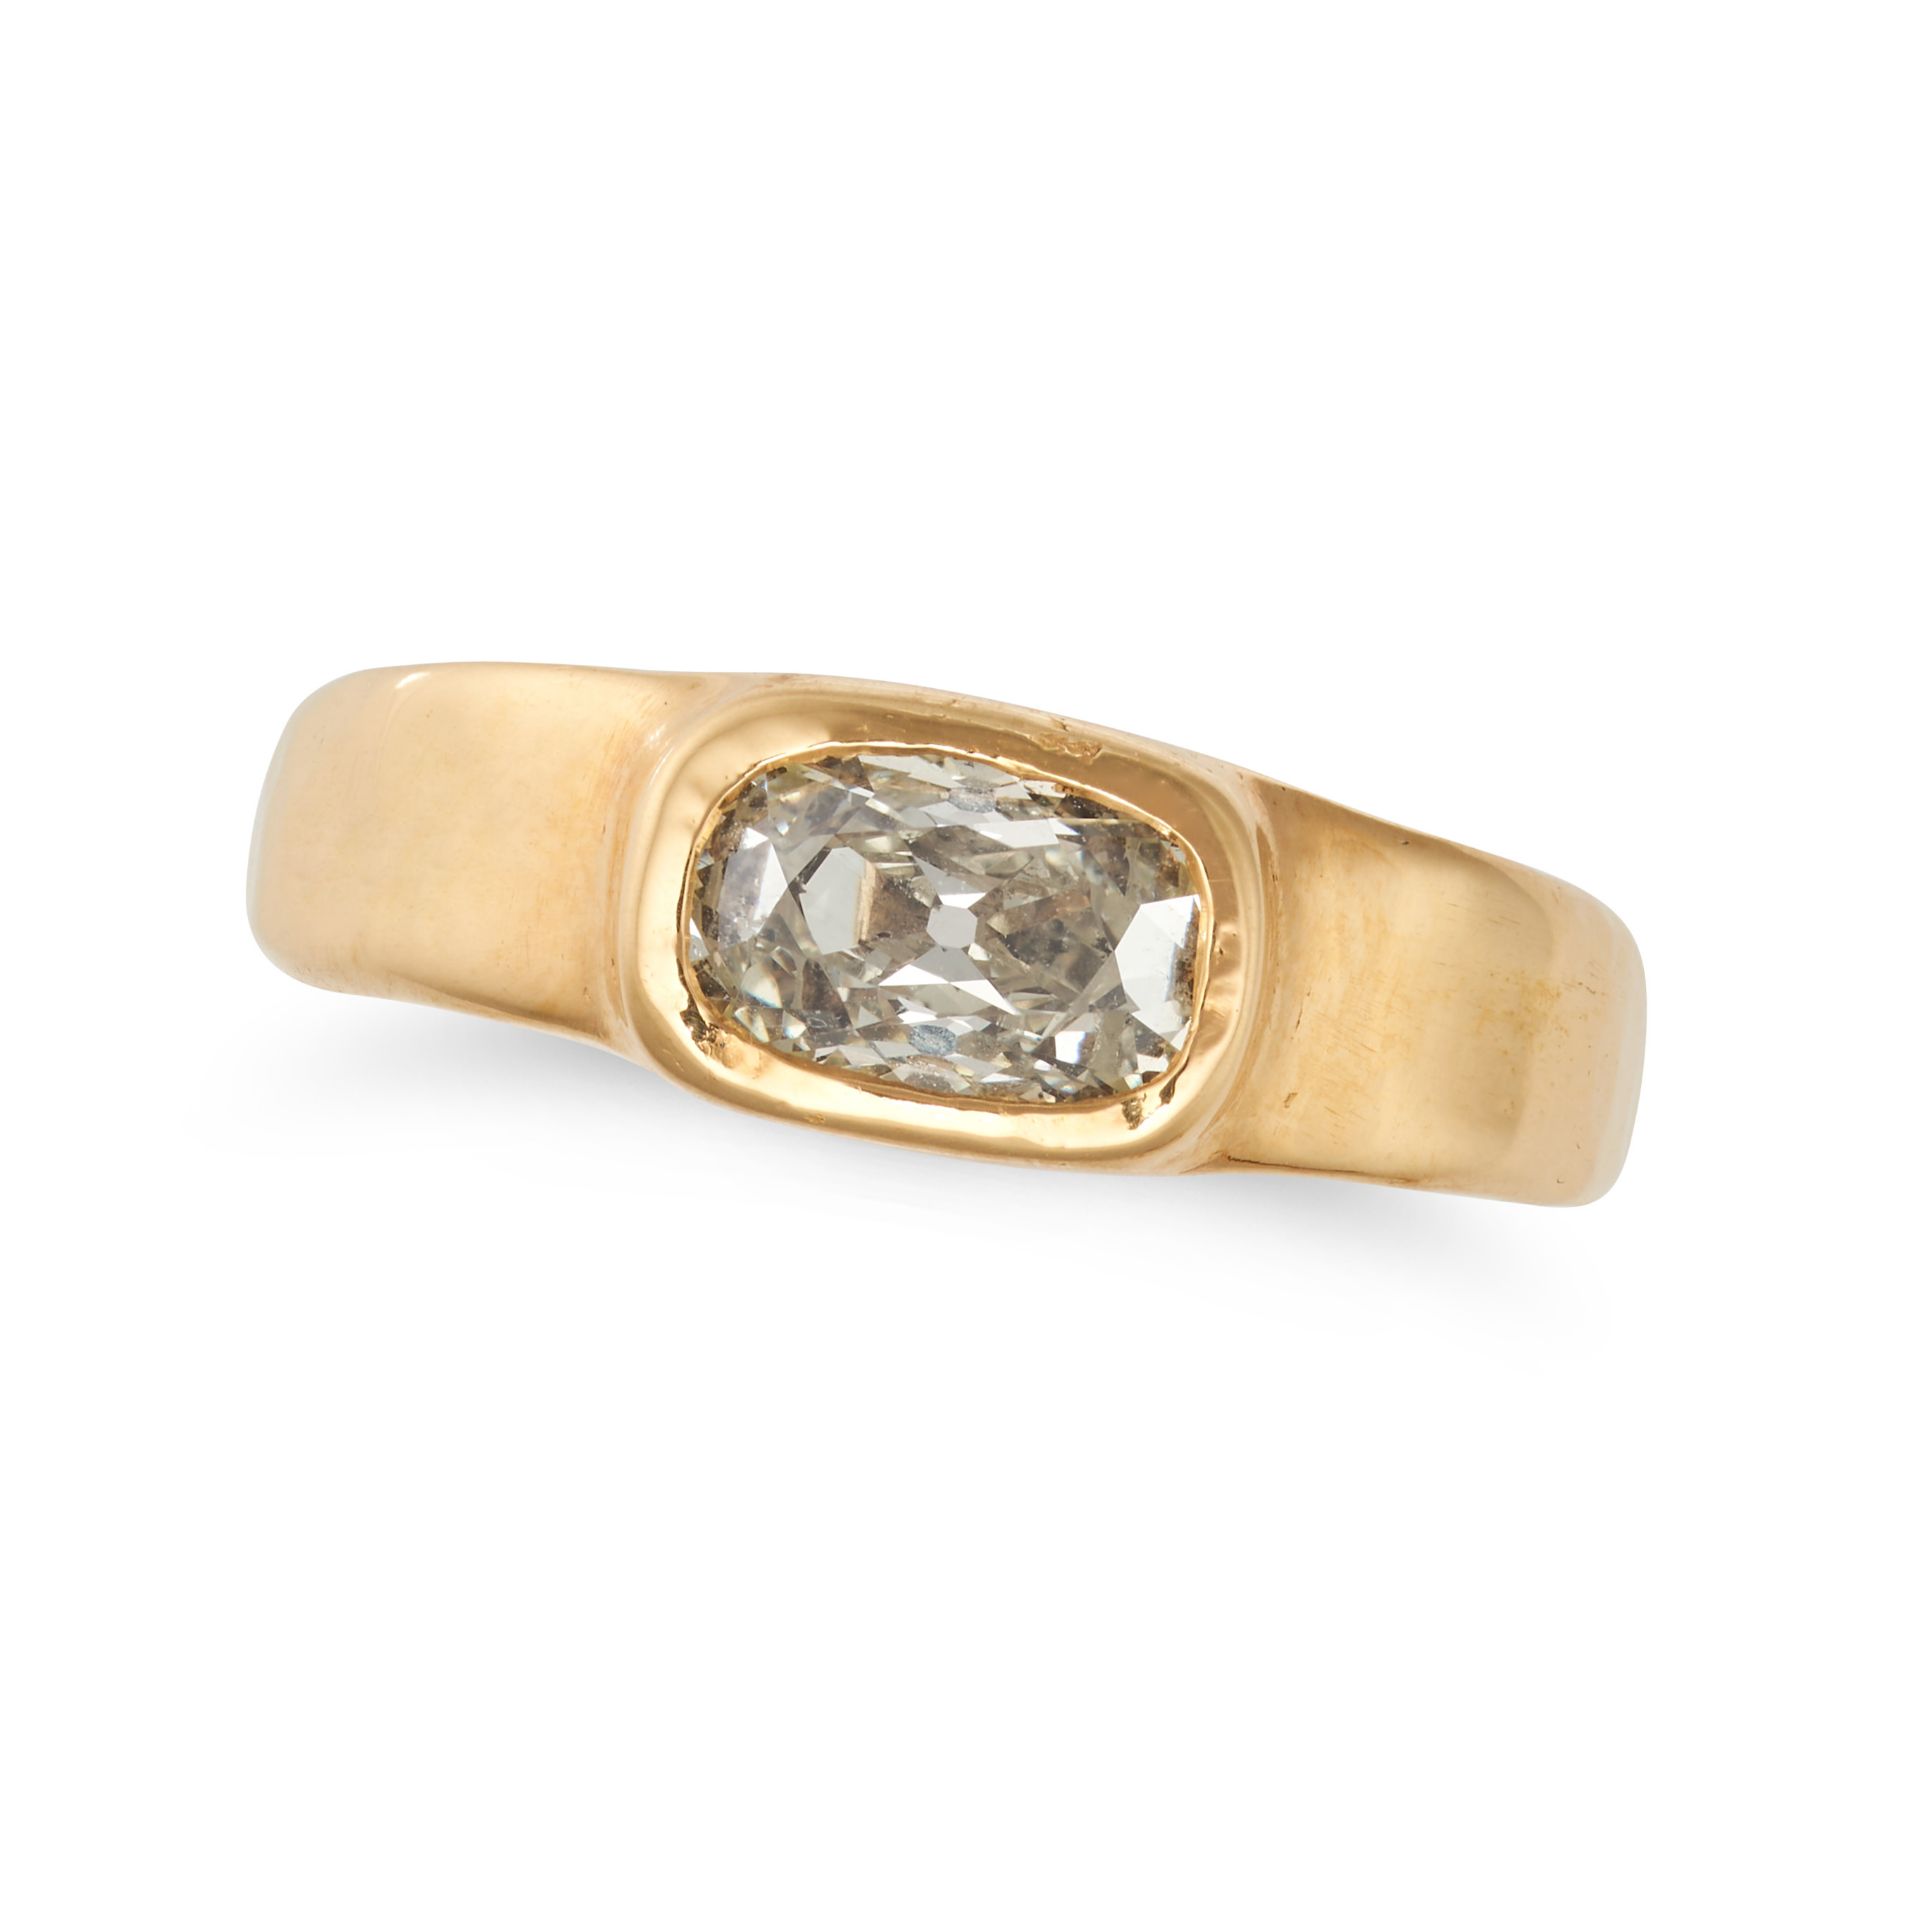 A DIAMOND GYPSY RING set with an old cut diamond of approximately 1.50 carats, no assay marks, si...